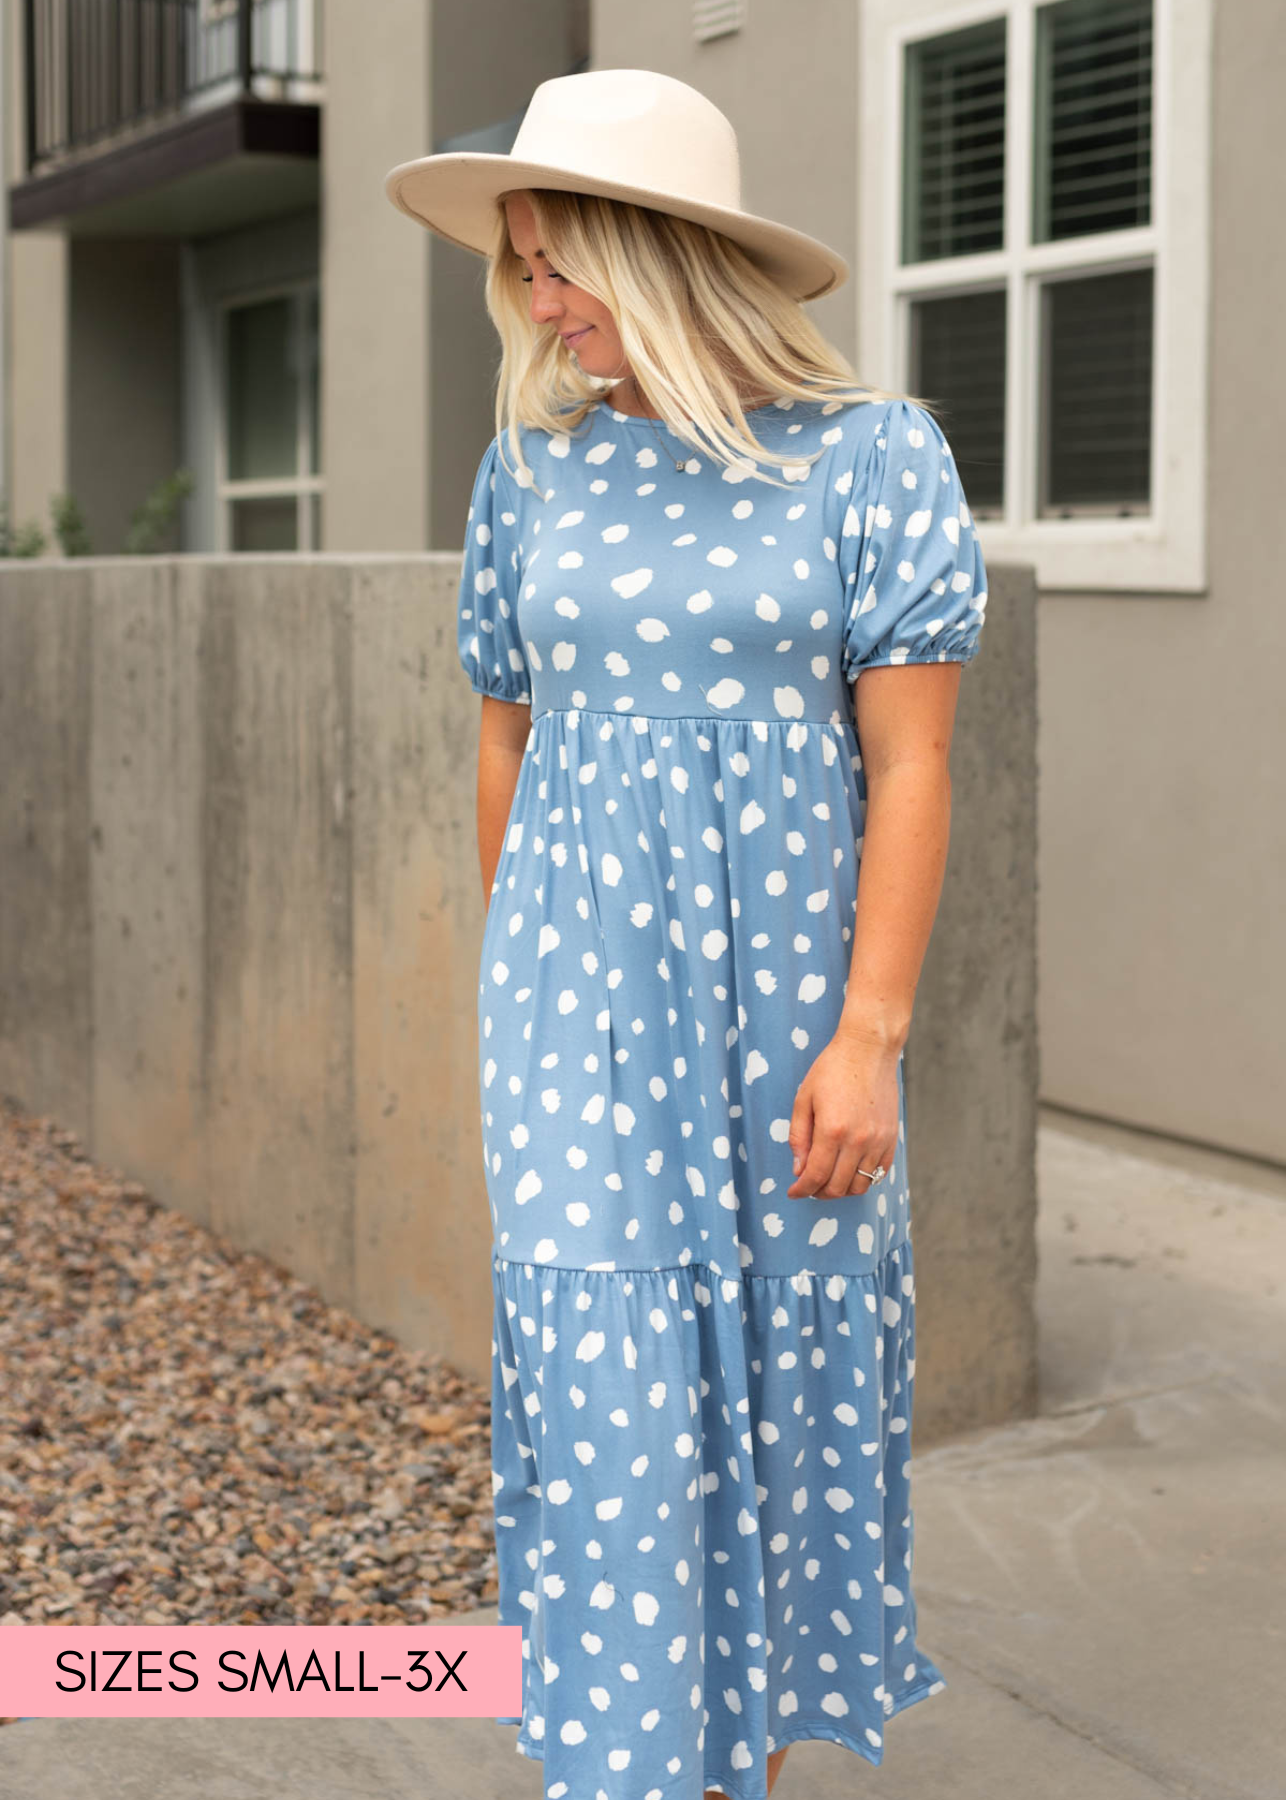 Short sleeve blue dress with white spots